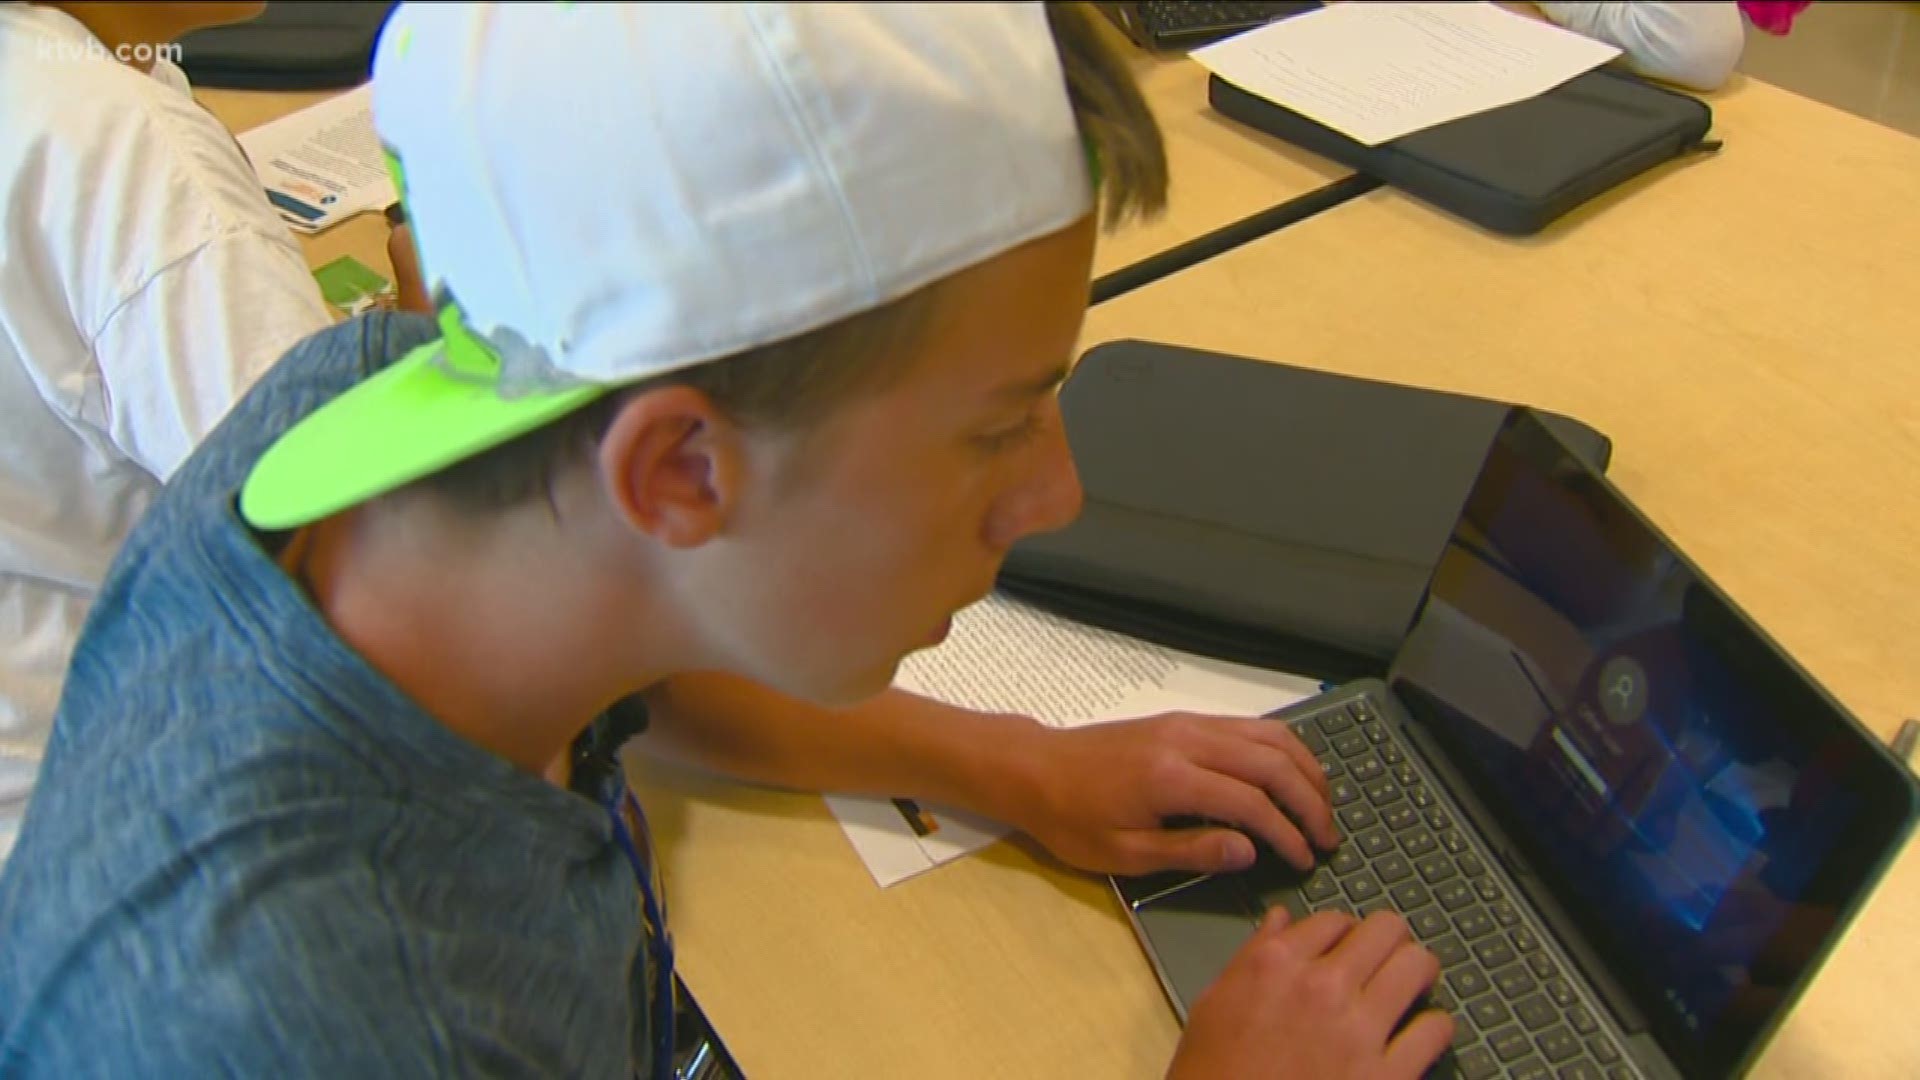 Nampa students have used laptops or tablets for the past few years; because of coronavirus concerns, the devices will become their link between home and school